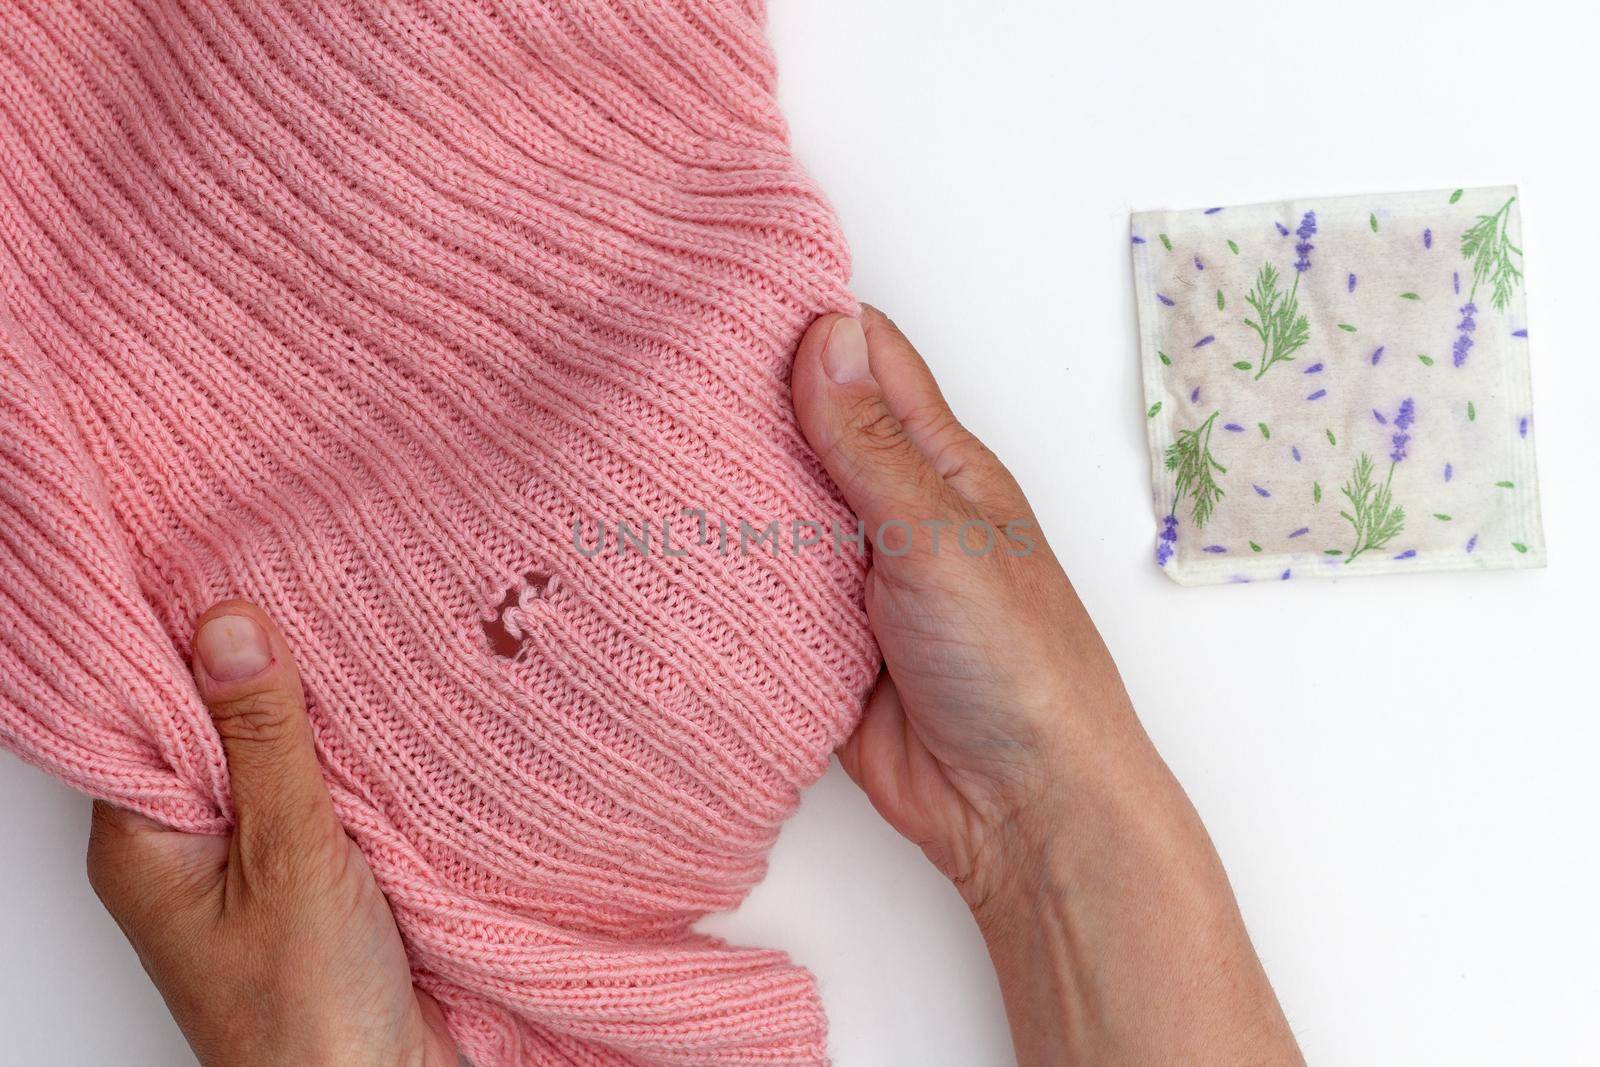 Top view of cropped woman hands holding pink wool fabric with hole made by moth and bag with dried lavender on white background